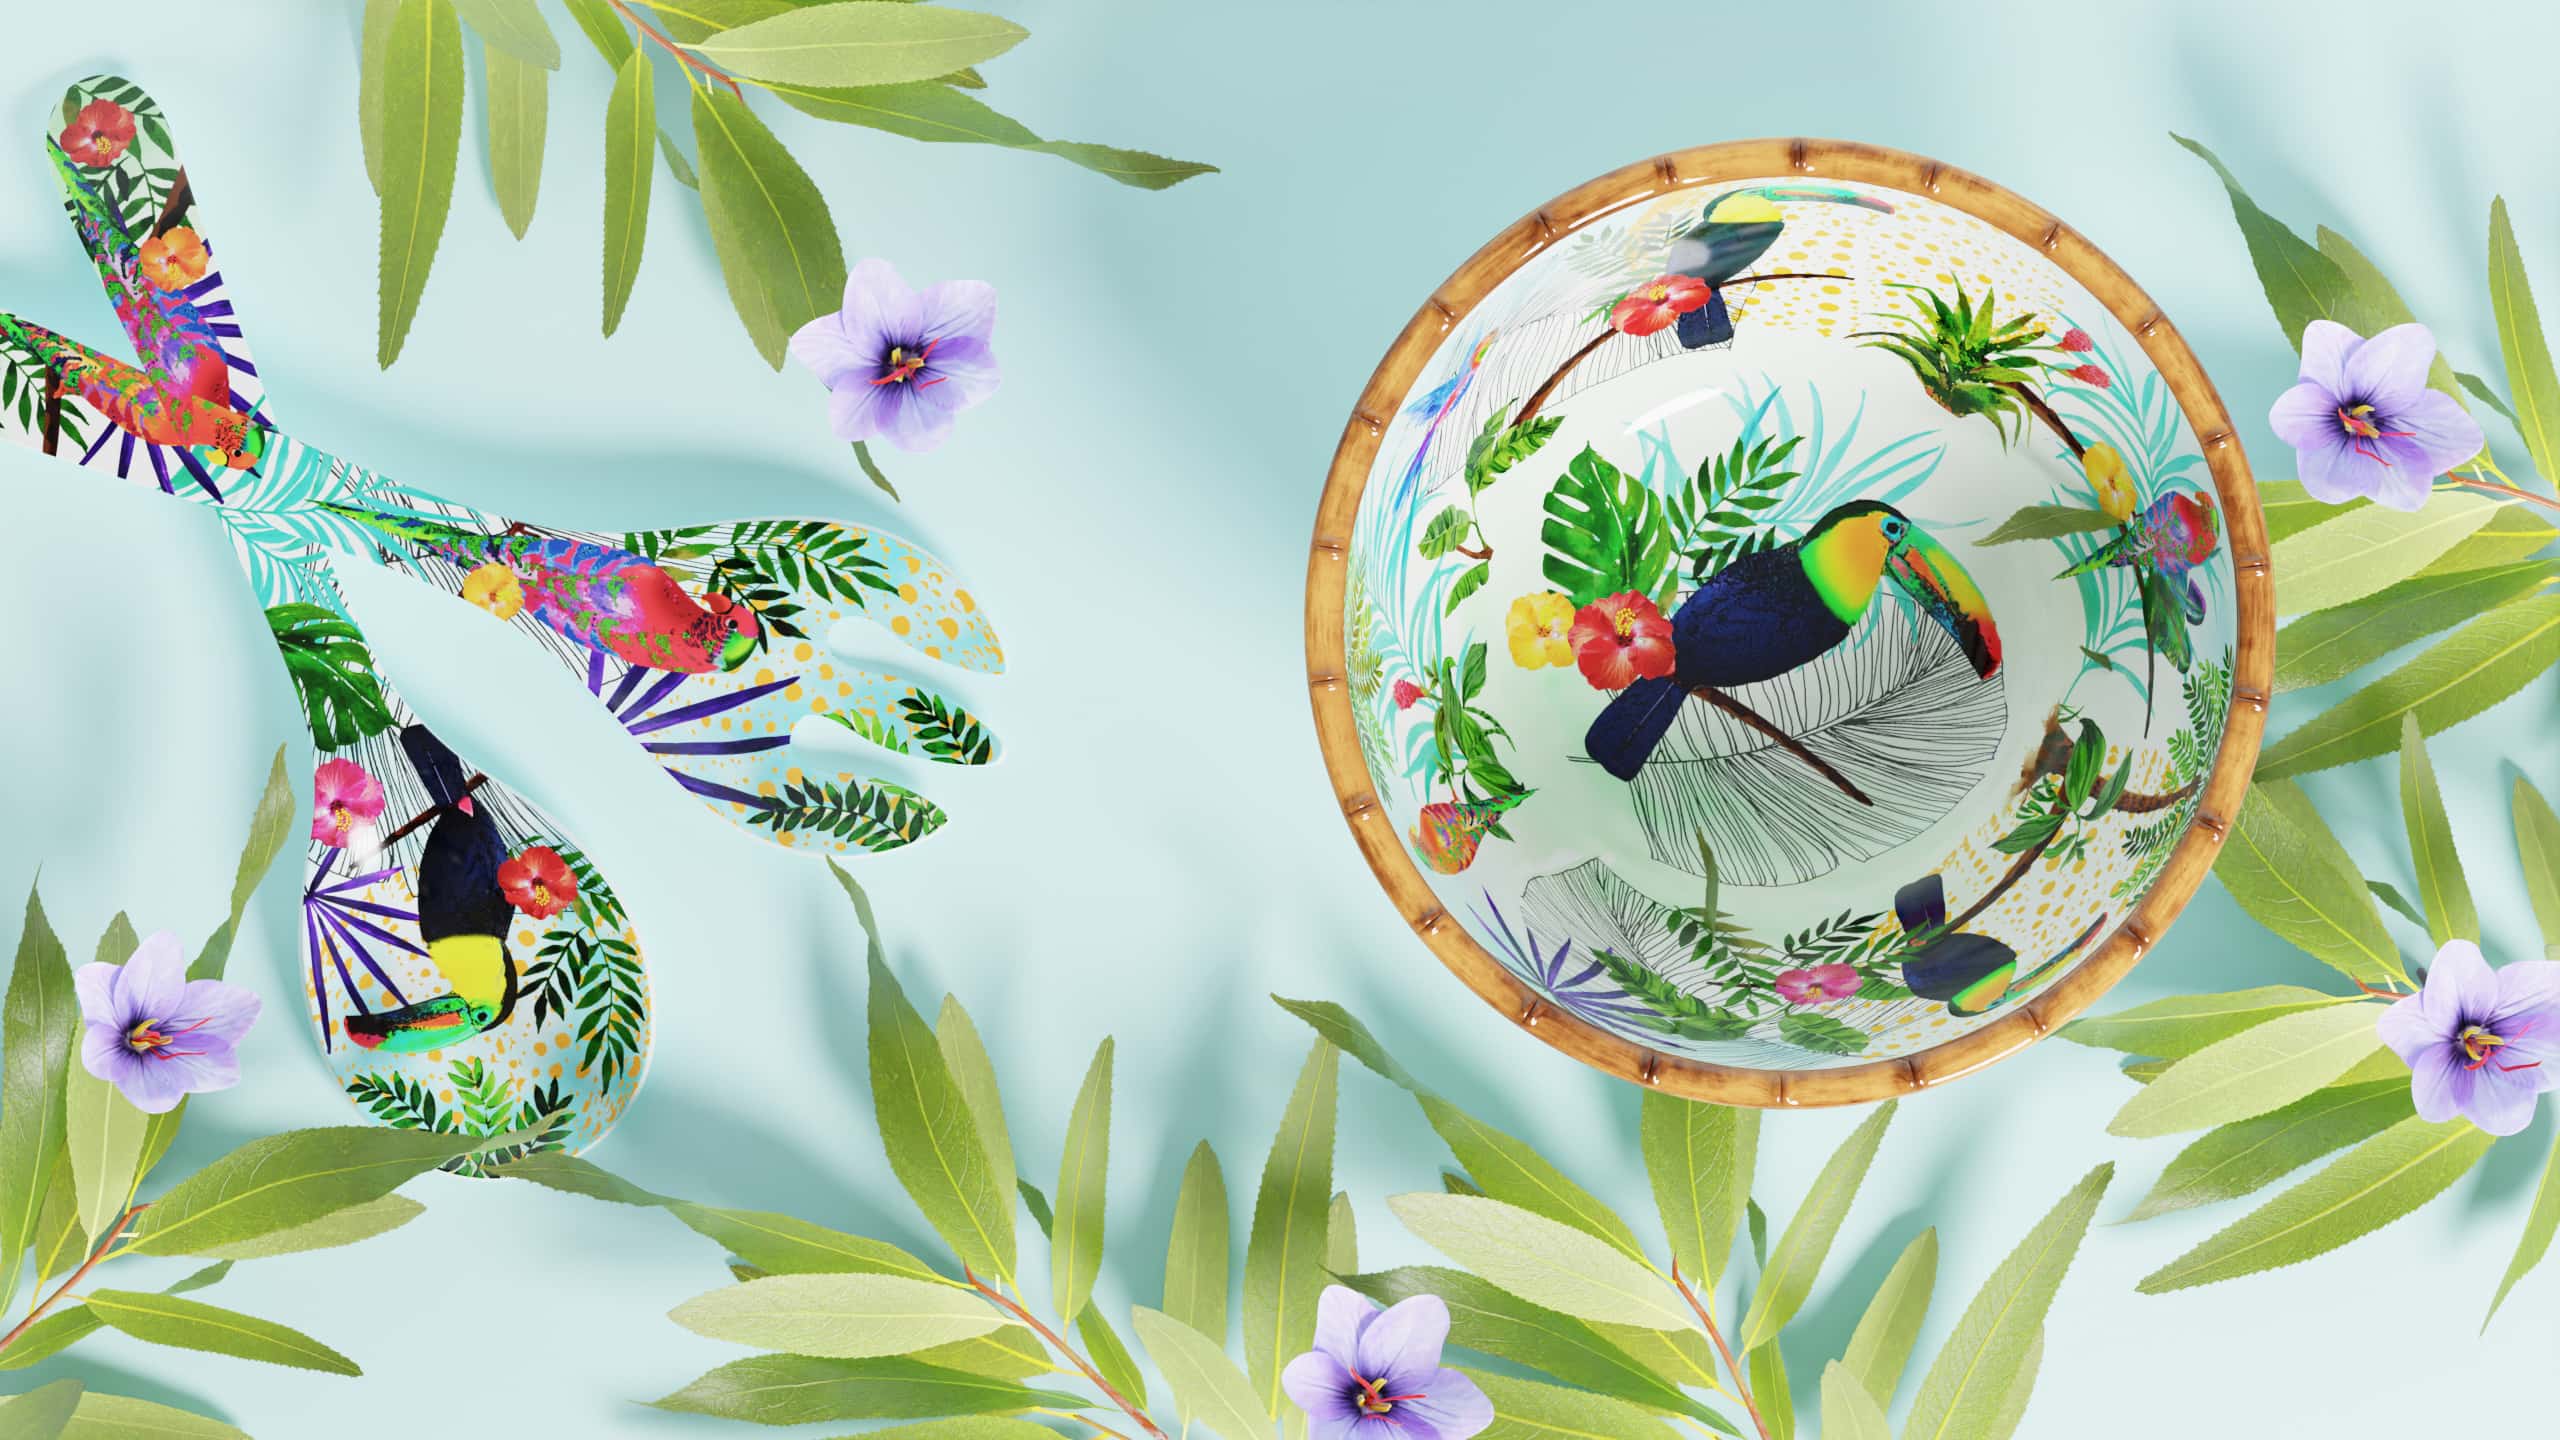 Toucans of Rio collection in melamine